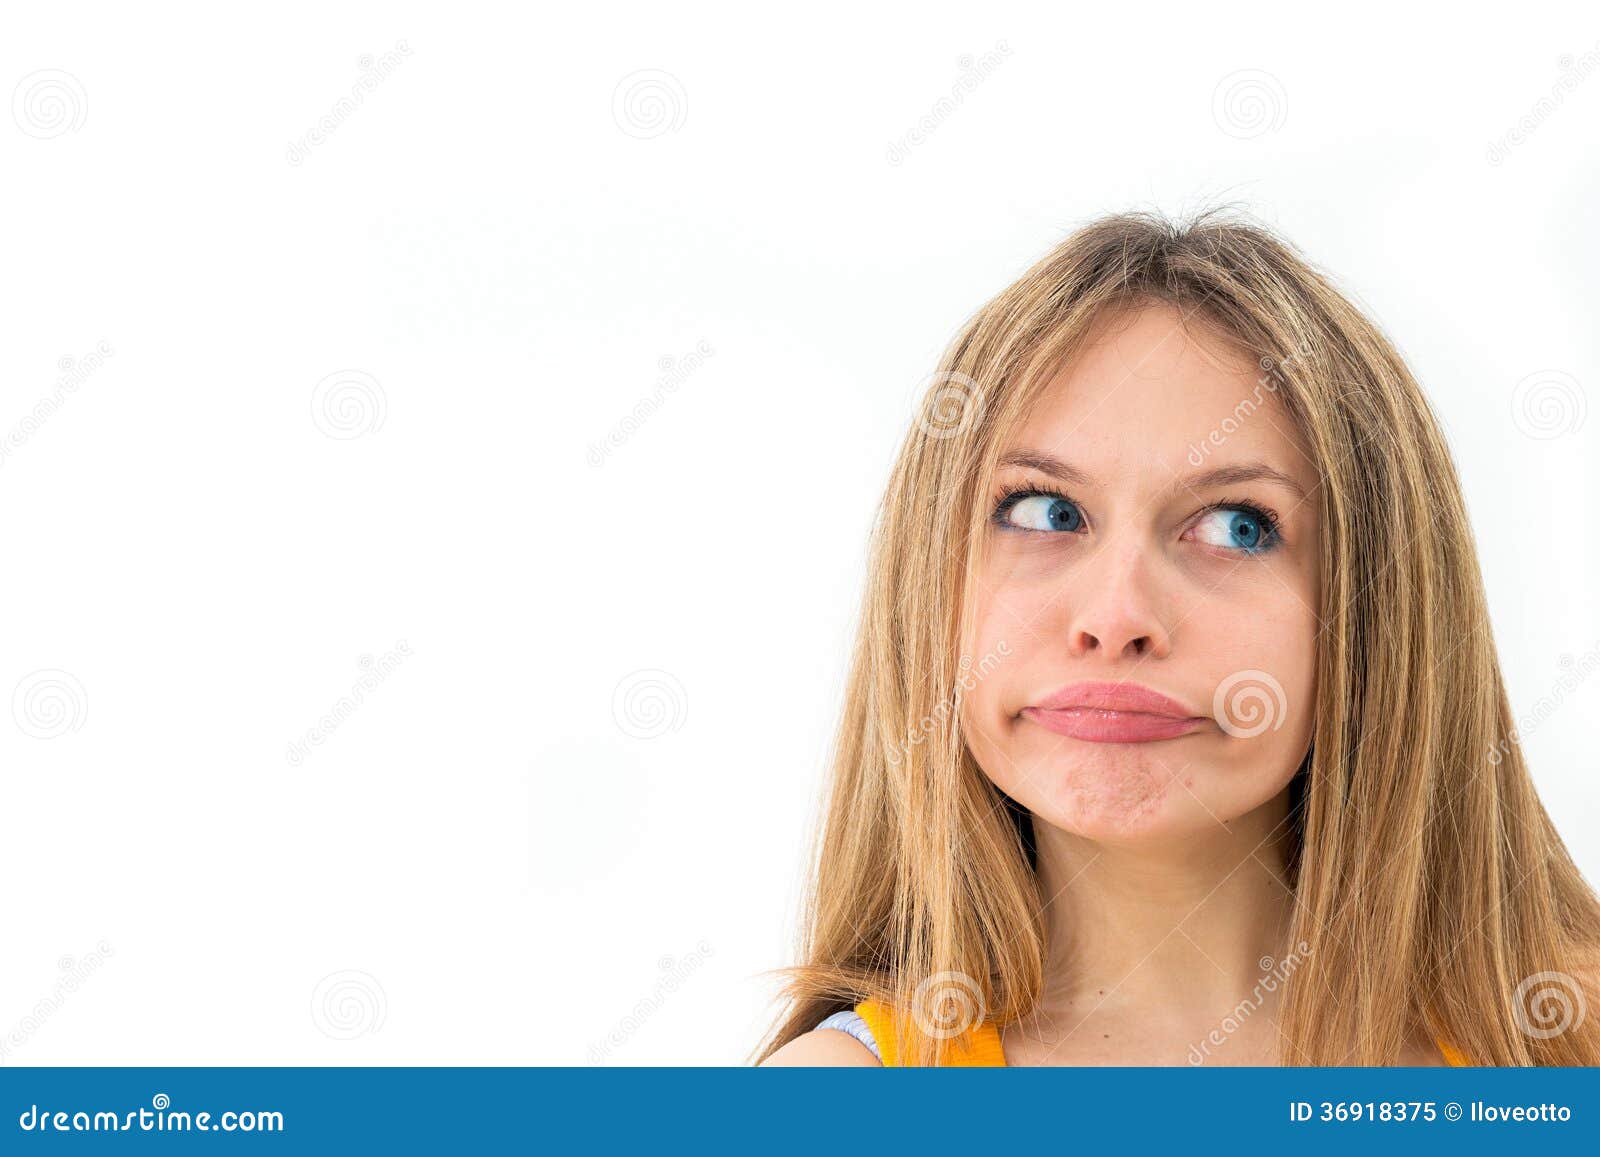 young woman making a funny grimace